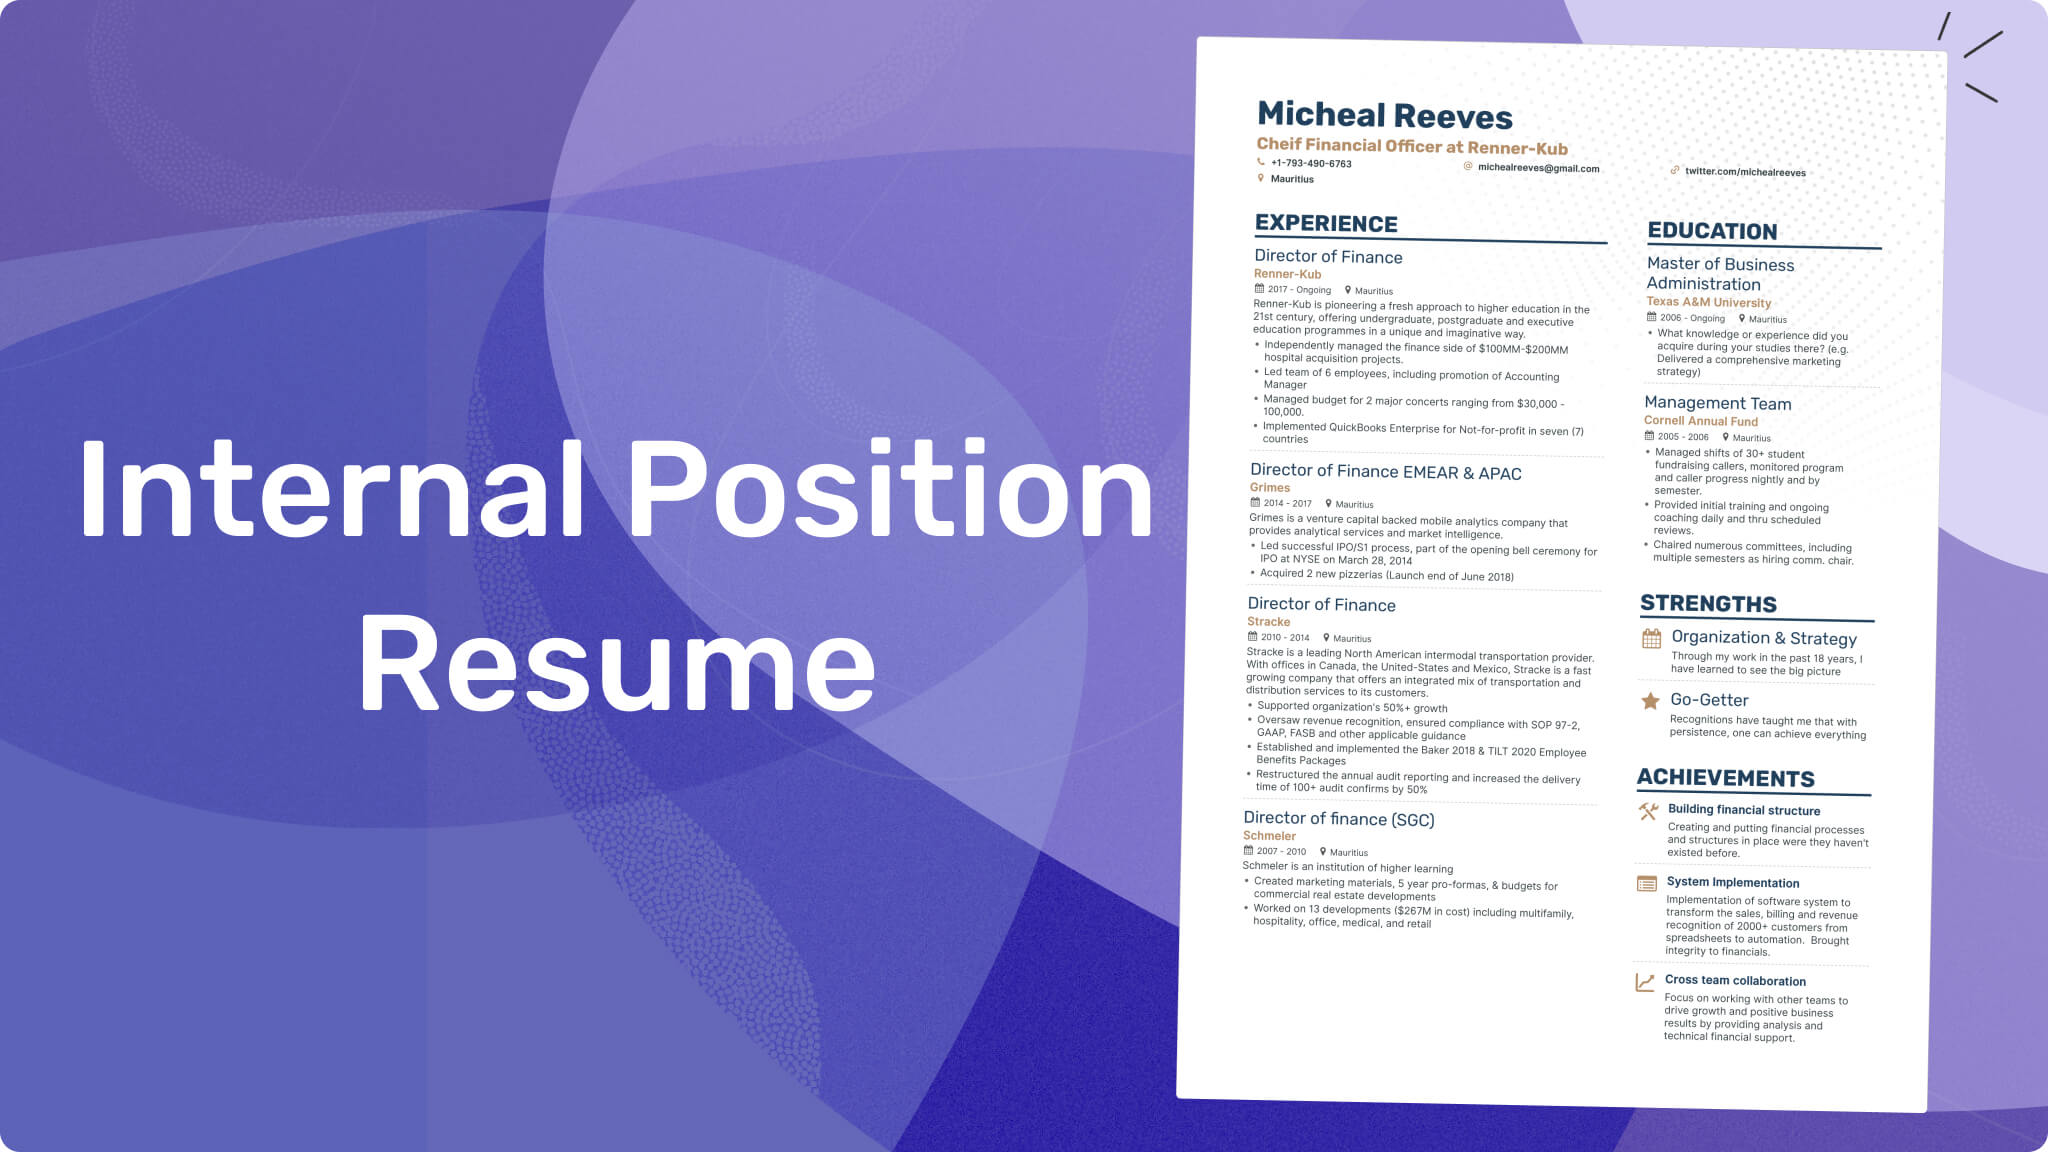 How to Write a Resume for Internal Position